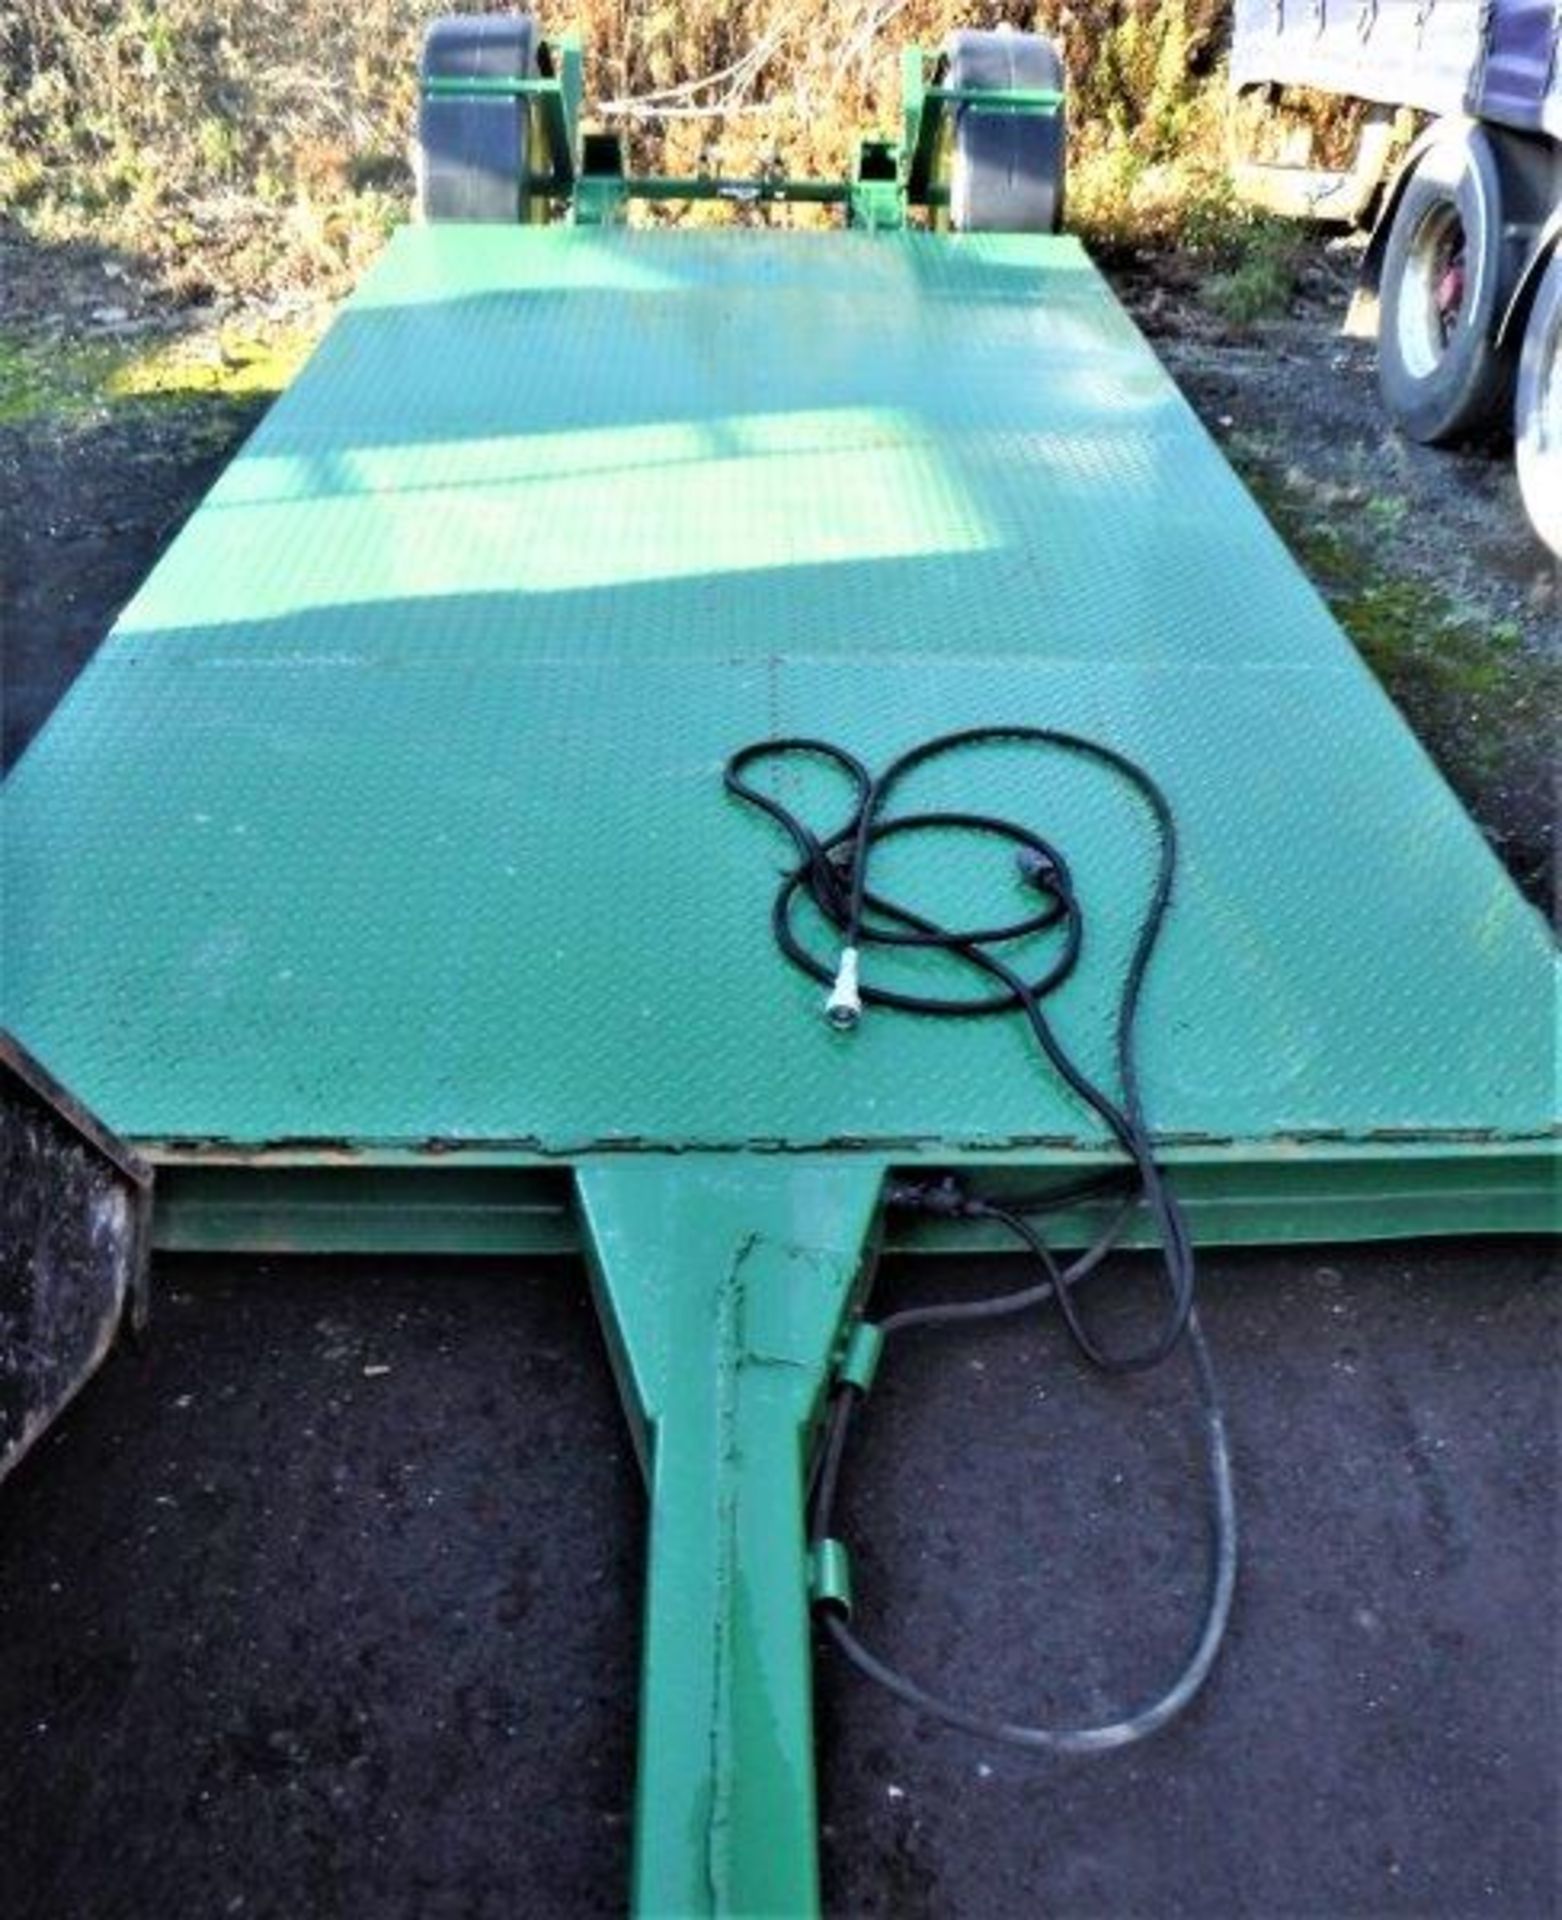 LOW LOADER TRAILER (REFURBISHED) BED 15' X 8' OVERALL LENGTH 26' APPROX